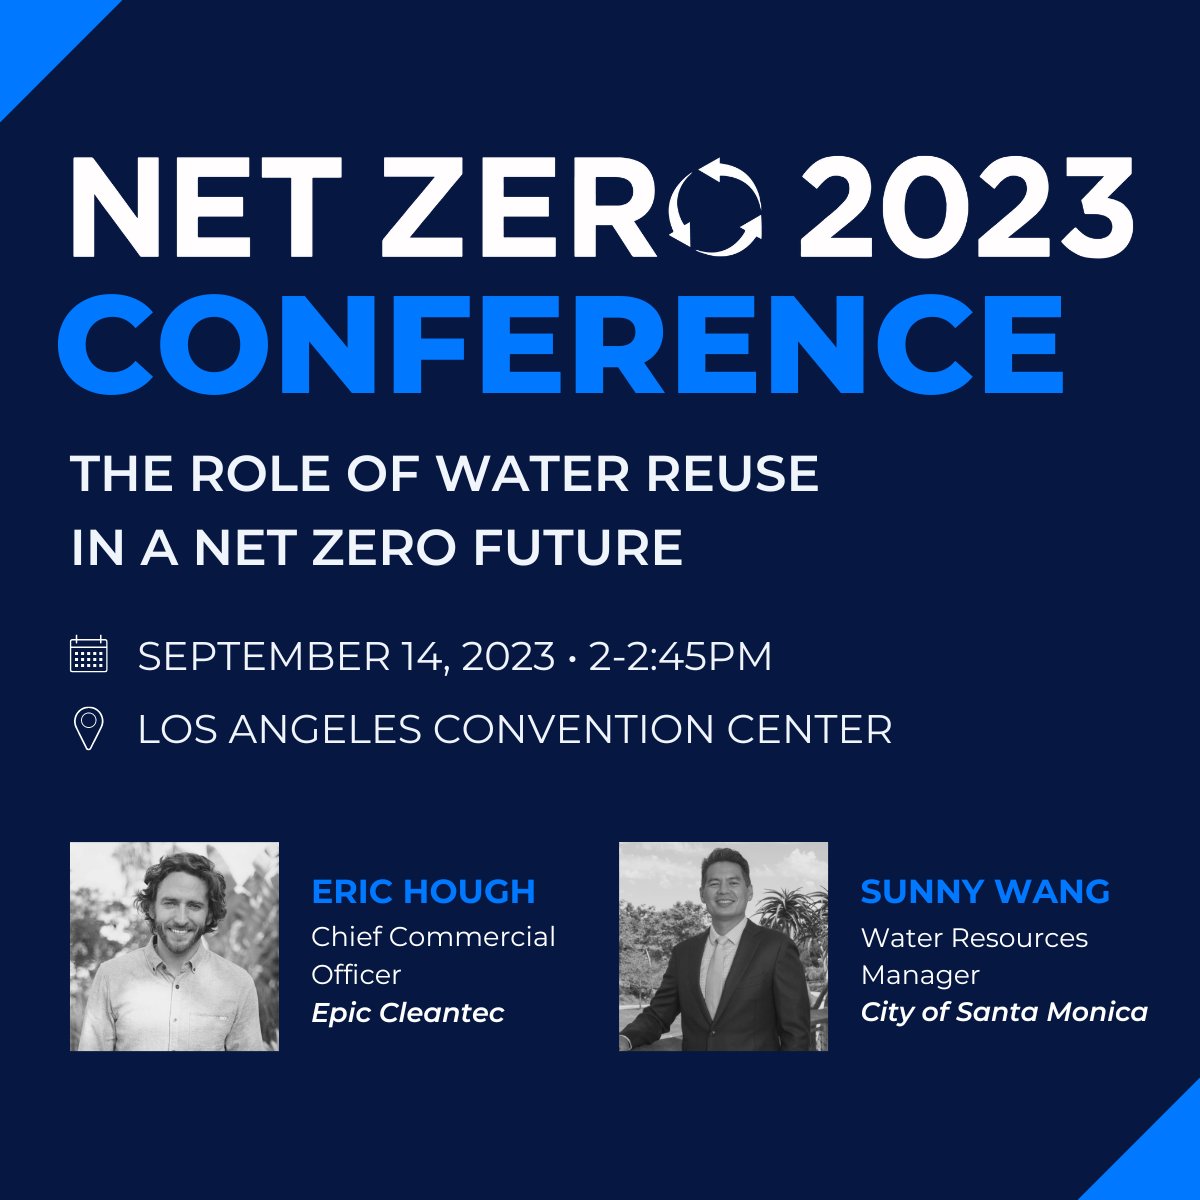 We are pleased to announce that Eric Hough, our Chief Commercial Officer at Epic, will be joining Sunny Wang, Water Resources Manager of the city of Santa Monica, as a featured speaker at the 2023 Net Zero Conference.💧🌍 

#NetZeroConference #WaterReuse @VerdicalGroup